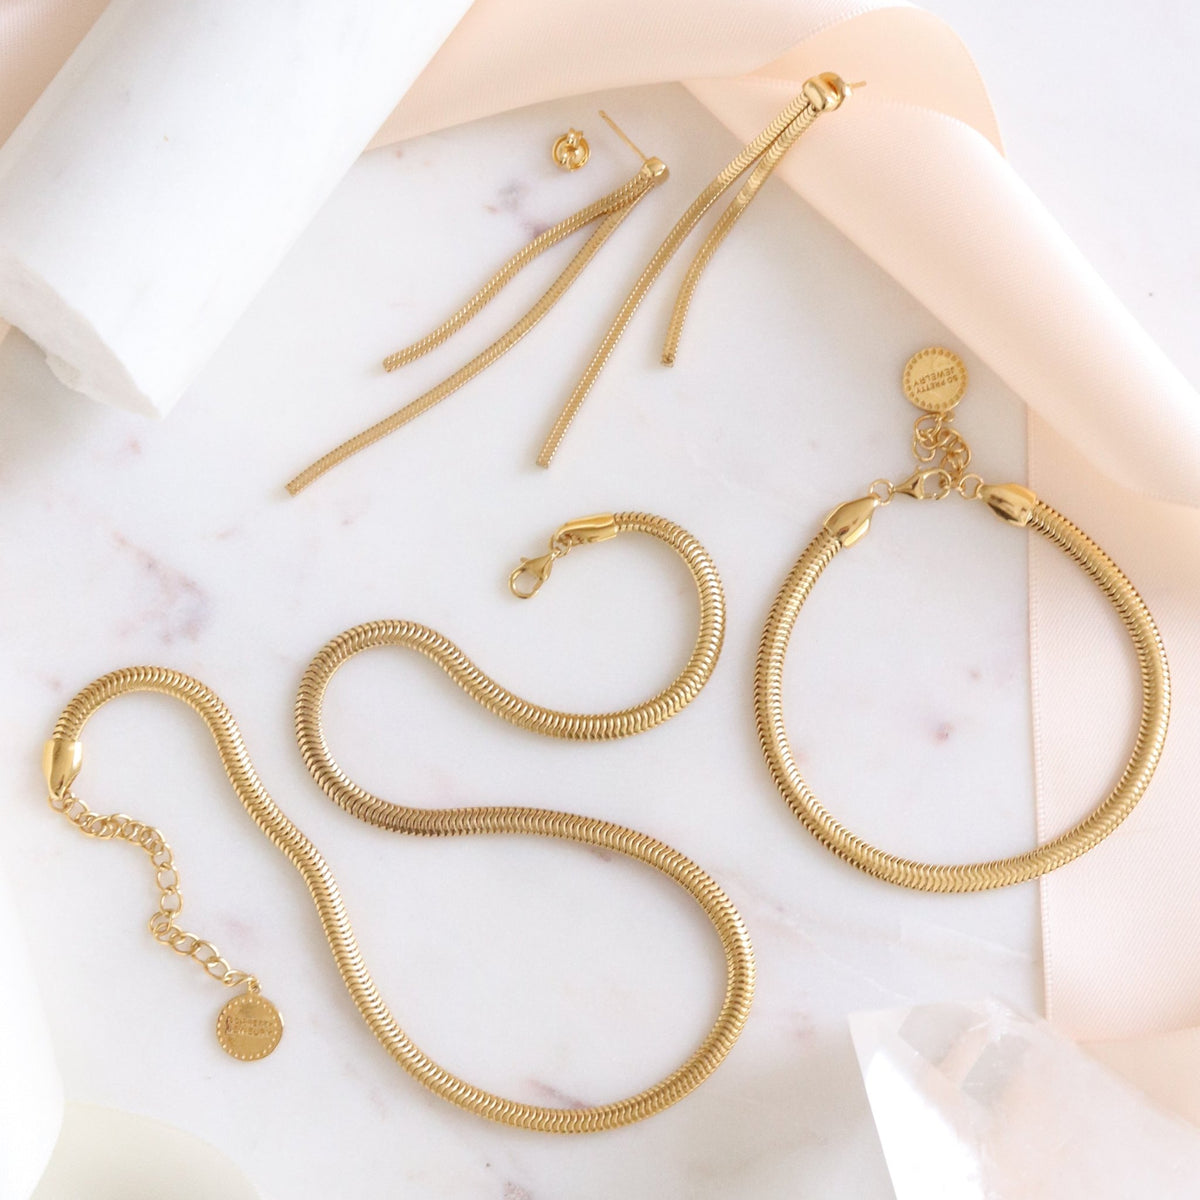 FEARLESS COBRA DUSTER EARRINGS - GOLD - SO PRETTY CARA COTTER